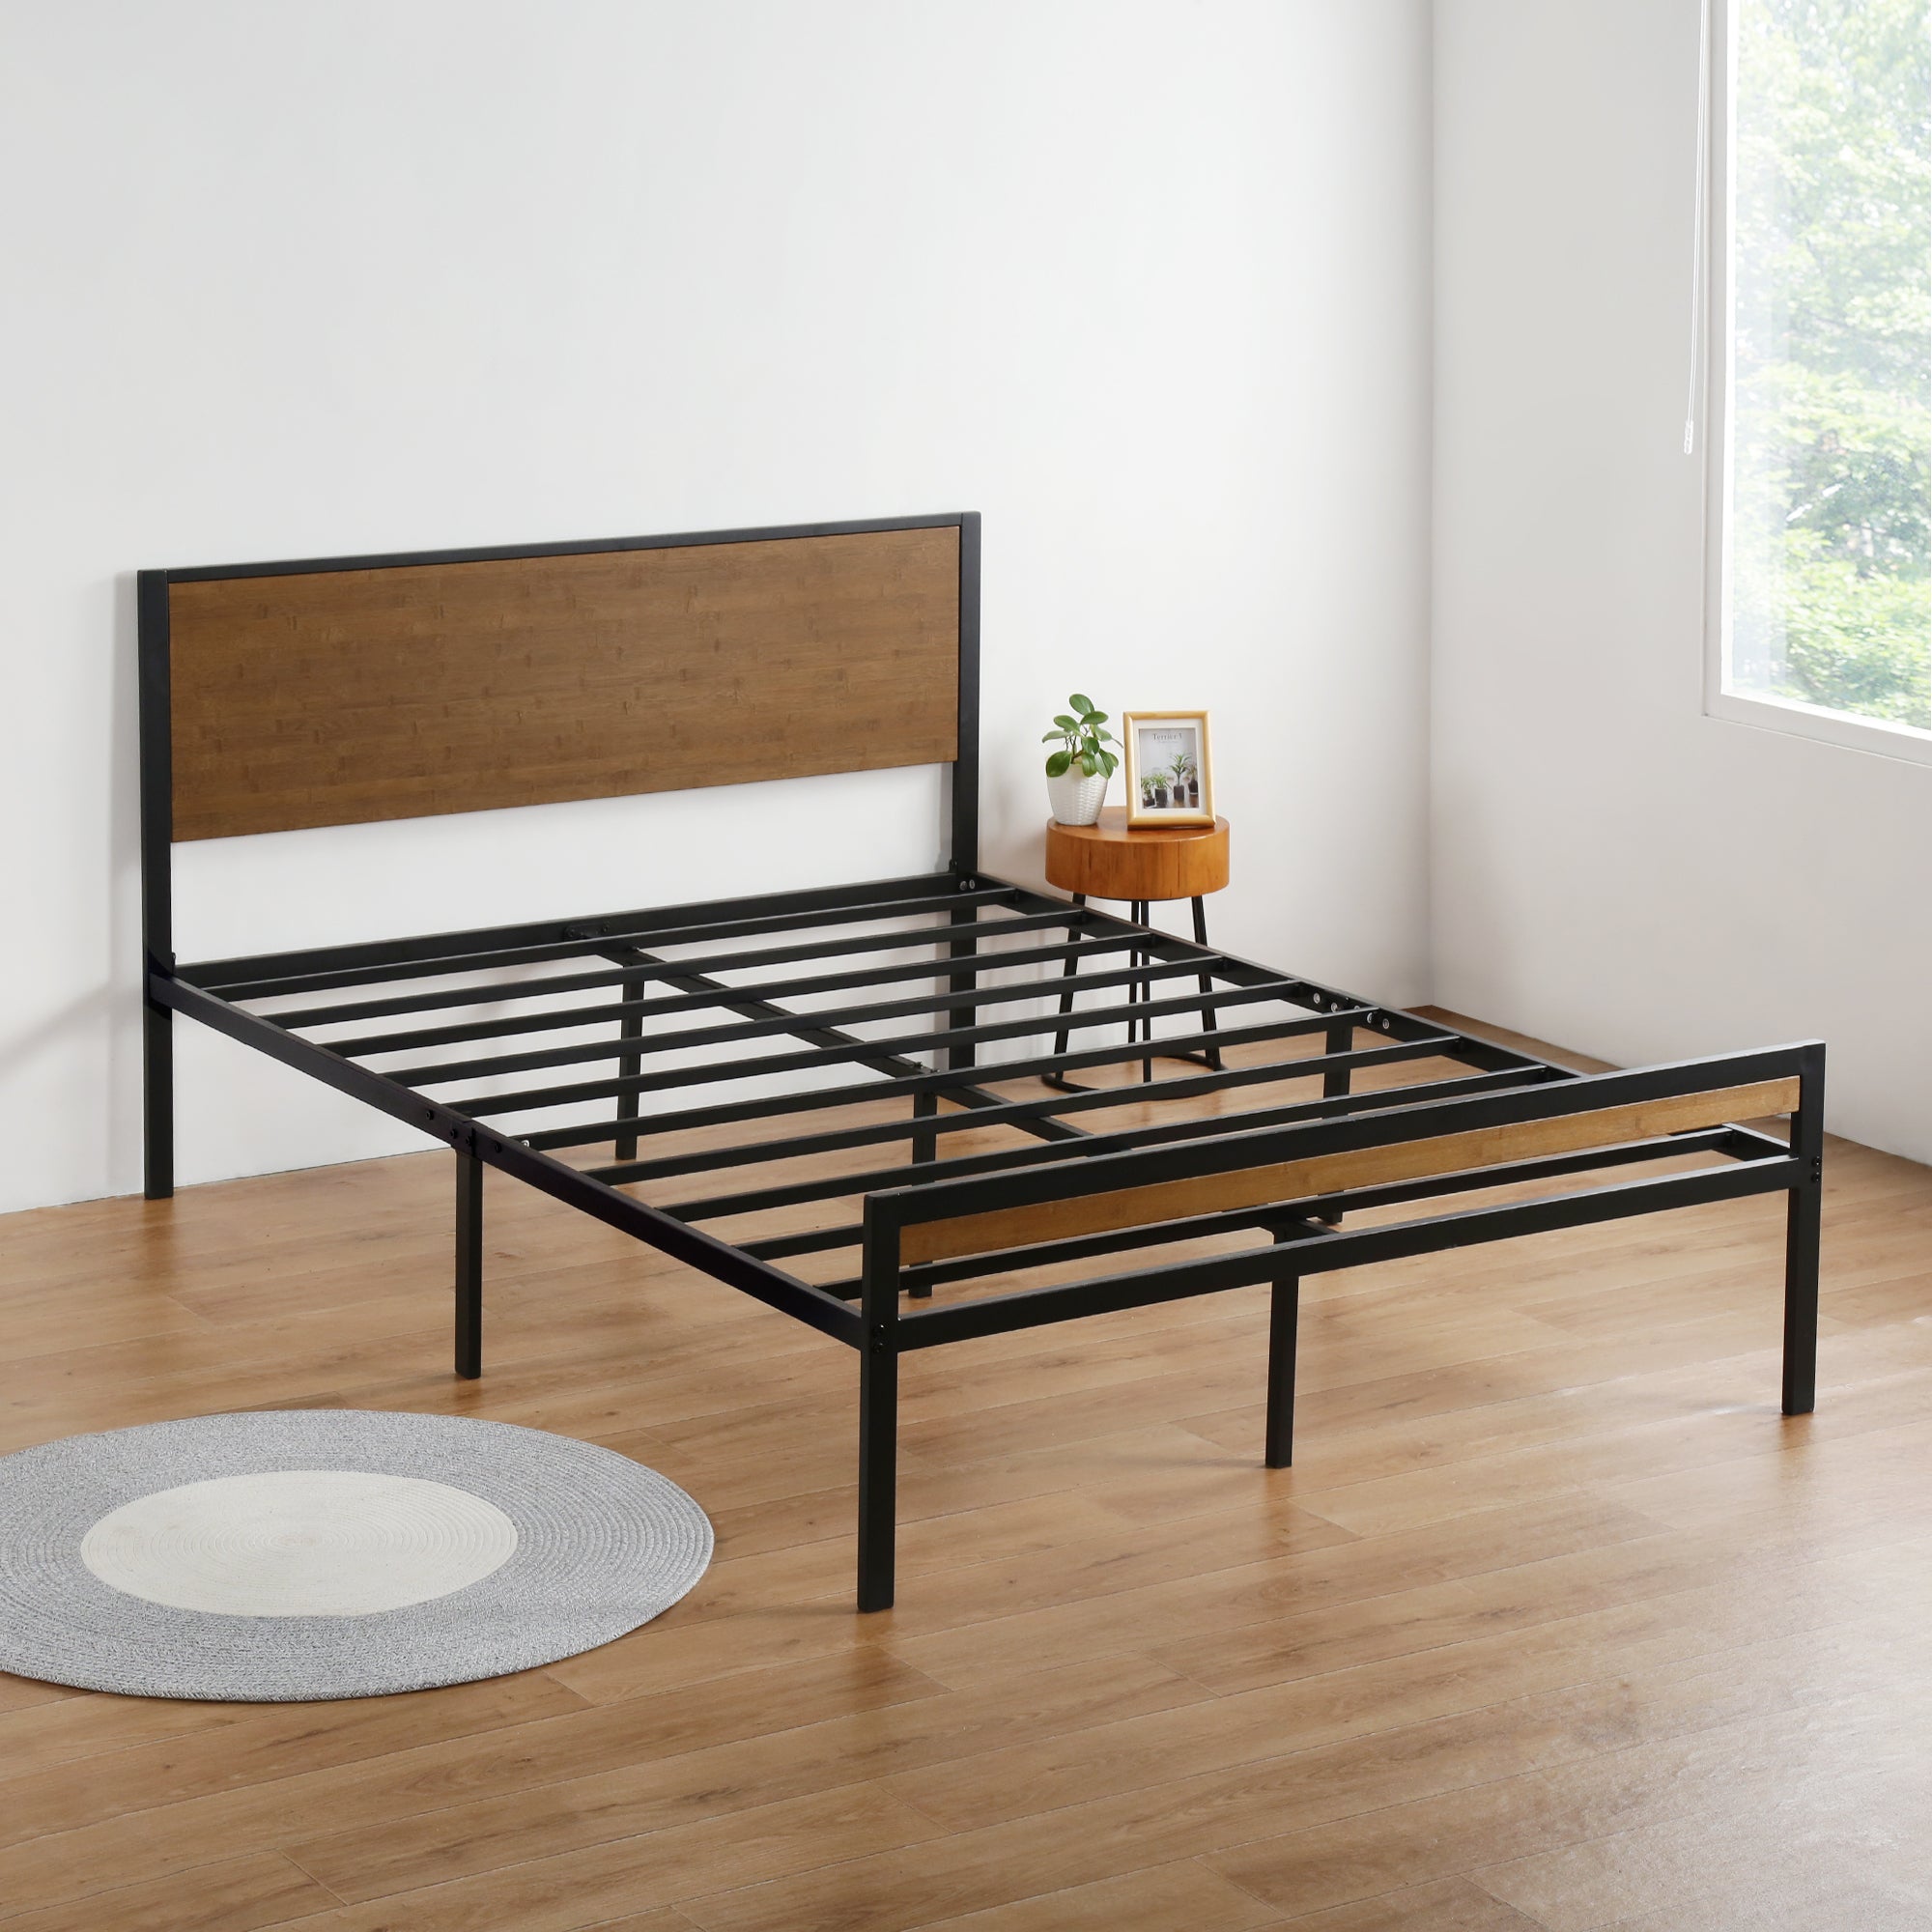 14 Inch Metal Platform Bed with Bamboo Headboard and Footboard